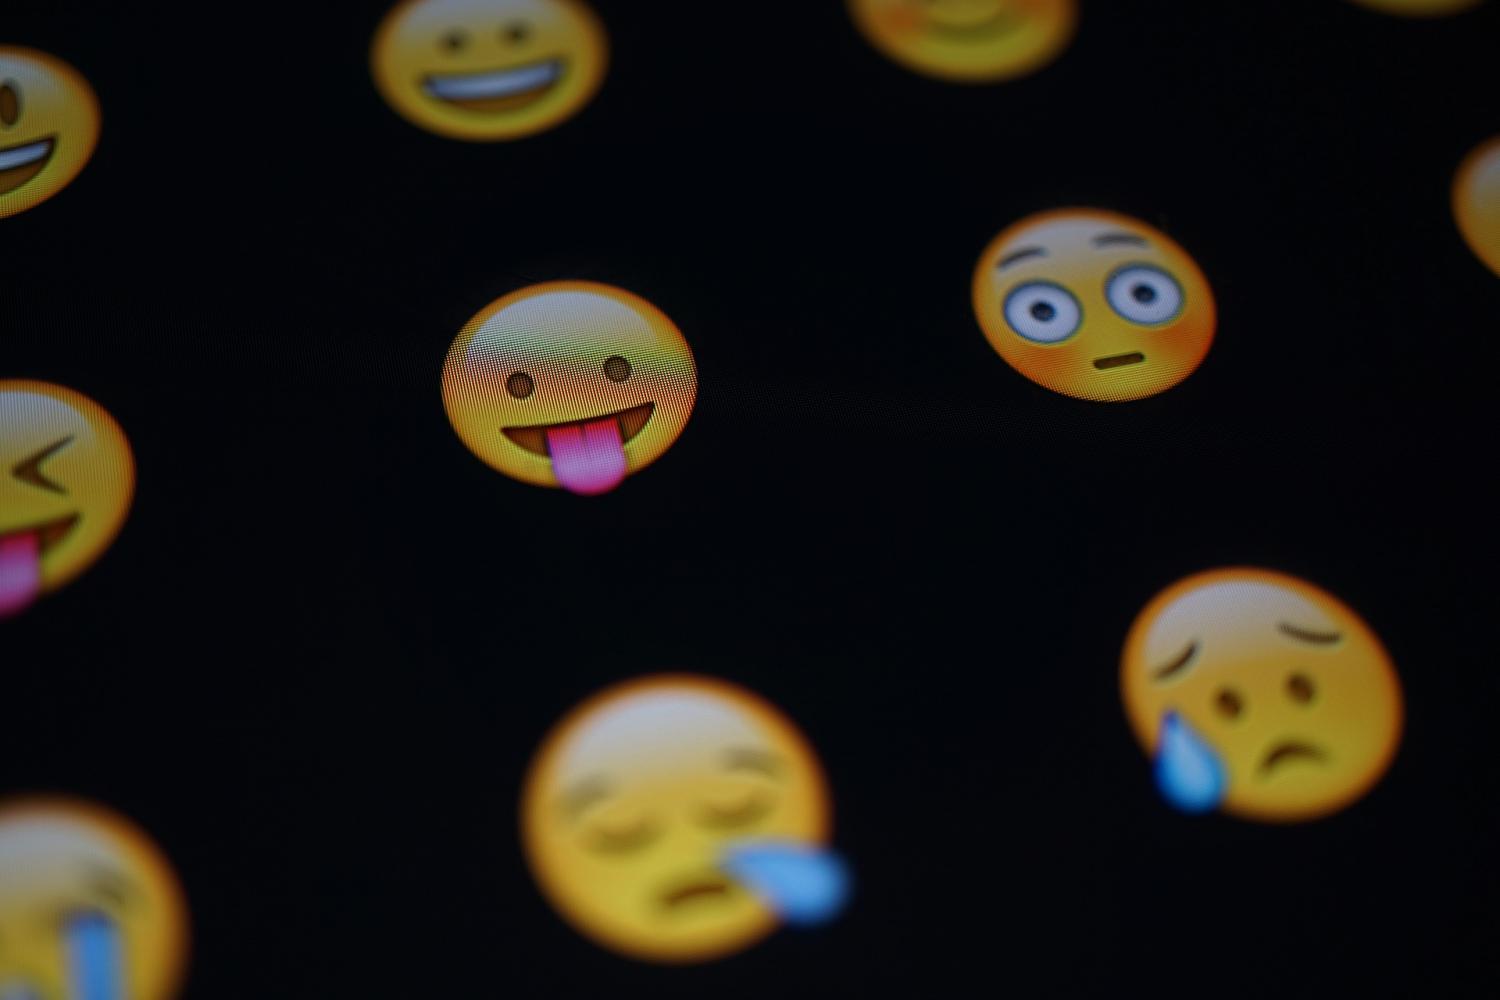 Our cultural backgrounds influence how we interpret emojis, study finds